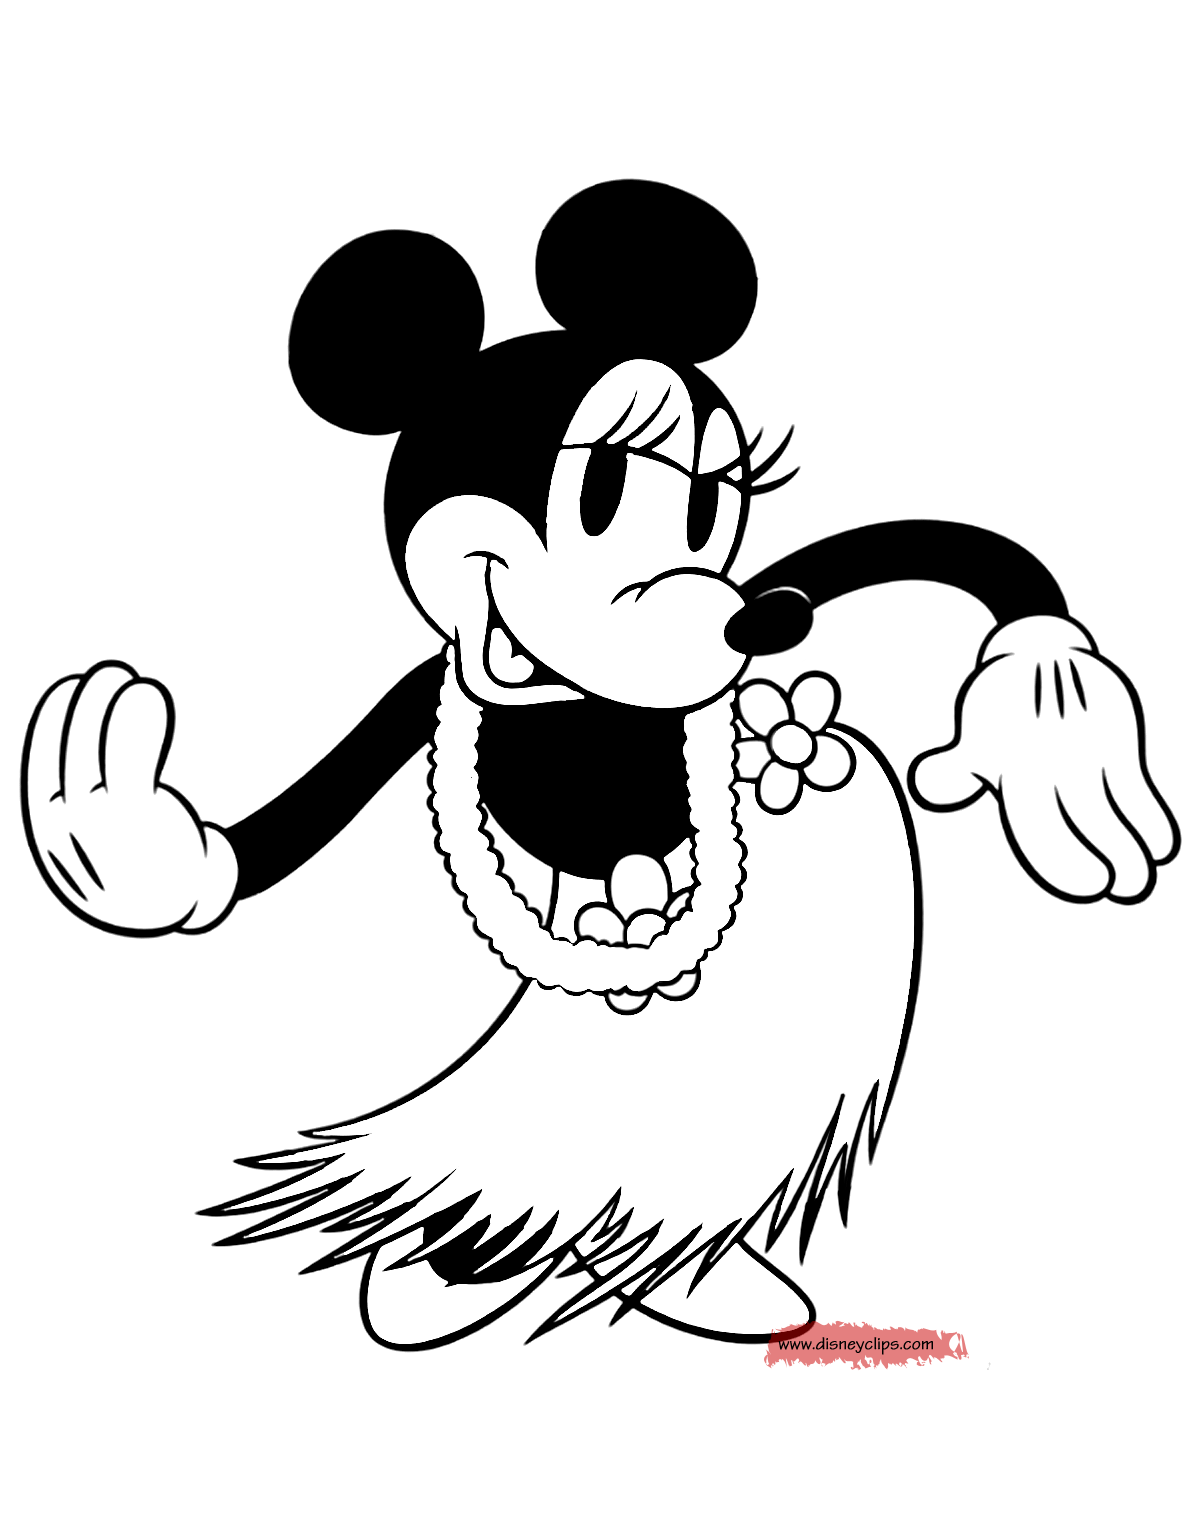 Classic Minnie Mouse Printable Coloring Pages | Disney Coloring Book